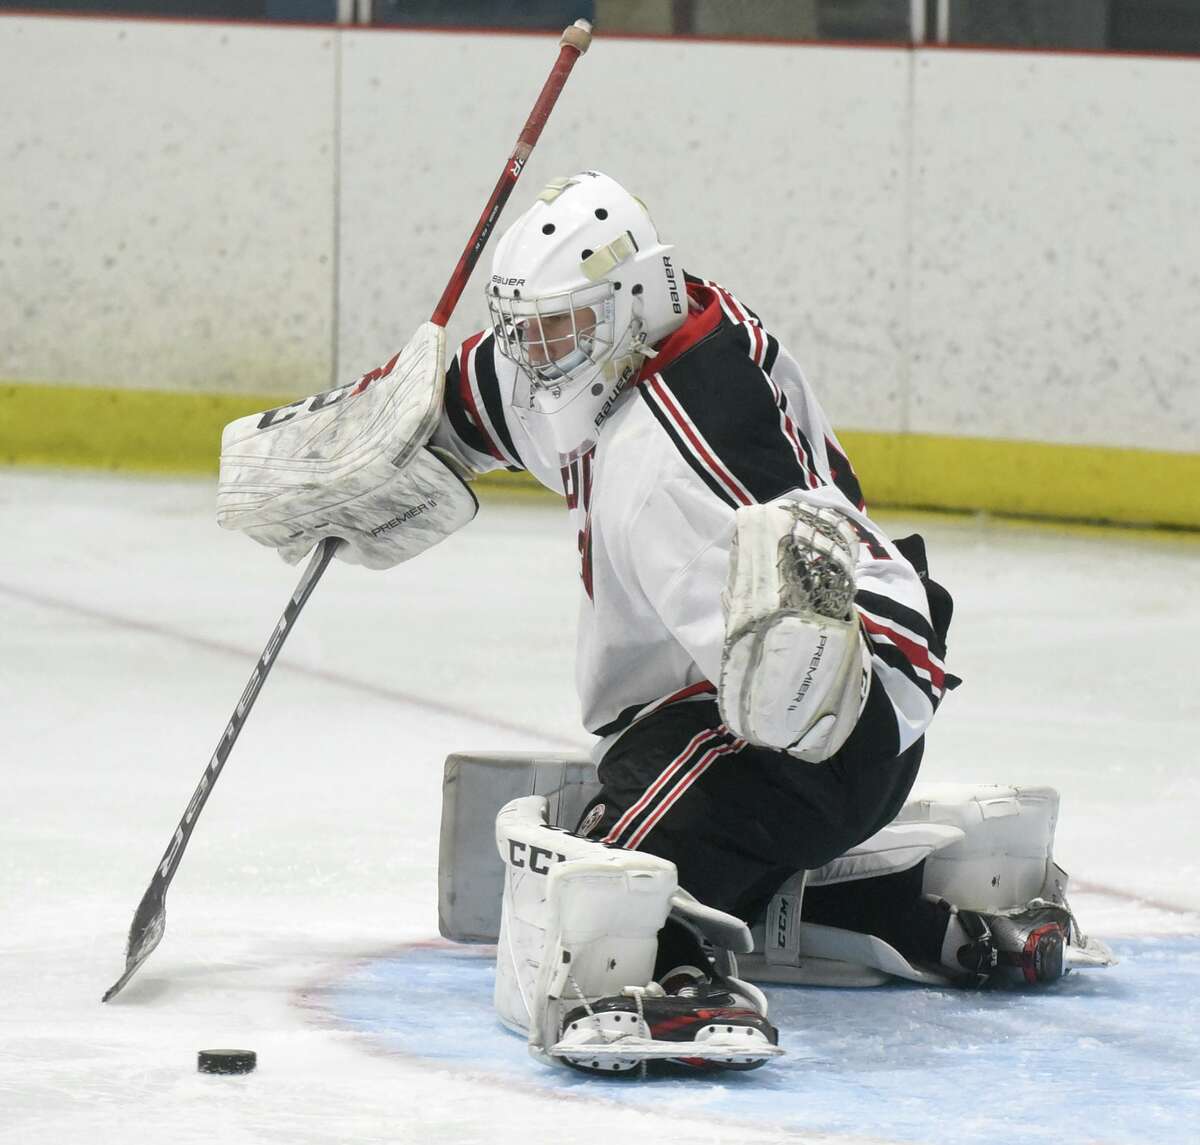 New Canaan goalie Beau Johnson makes a kick save during the Rams' boys ice hockey game against Ridgefield at the Darien Ice House on Saturday, Feb. 13, 2021.